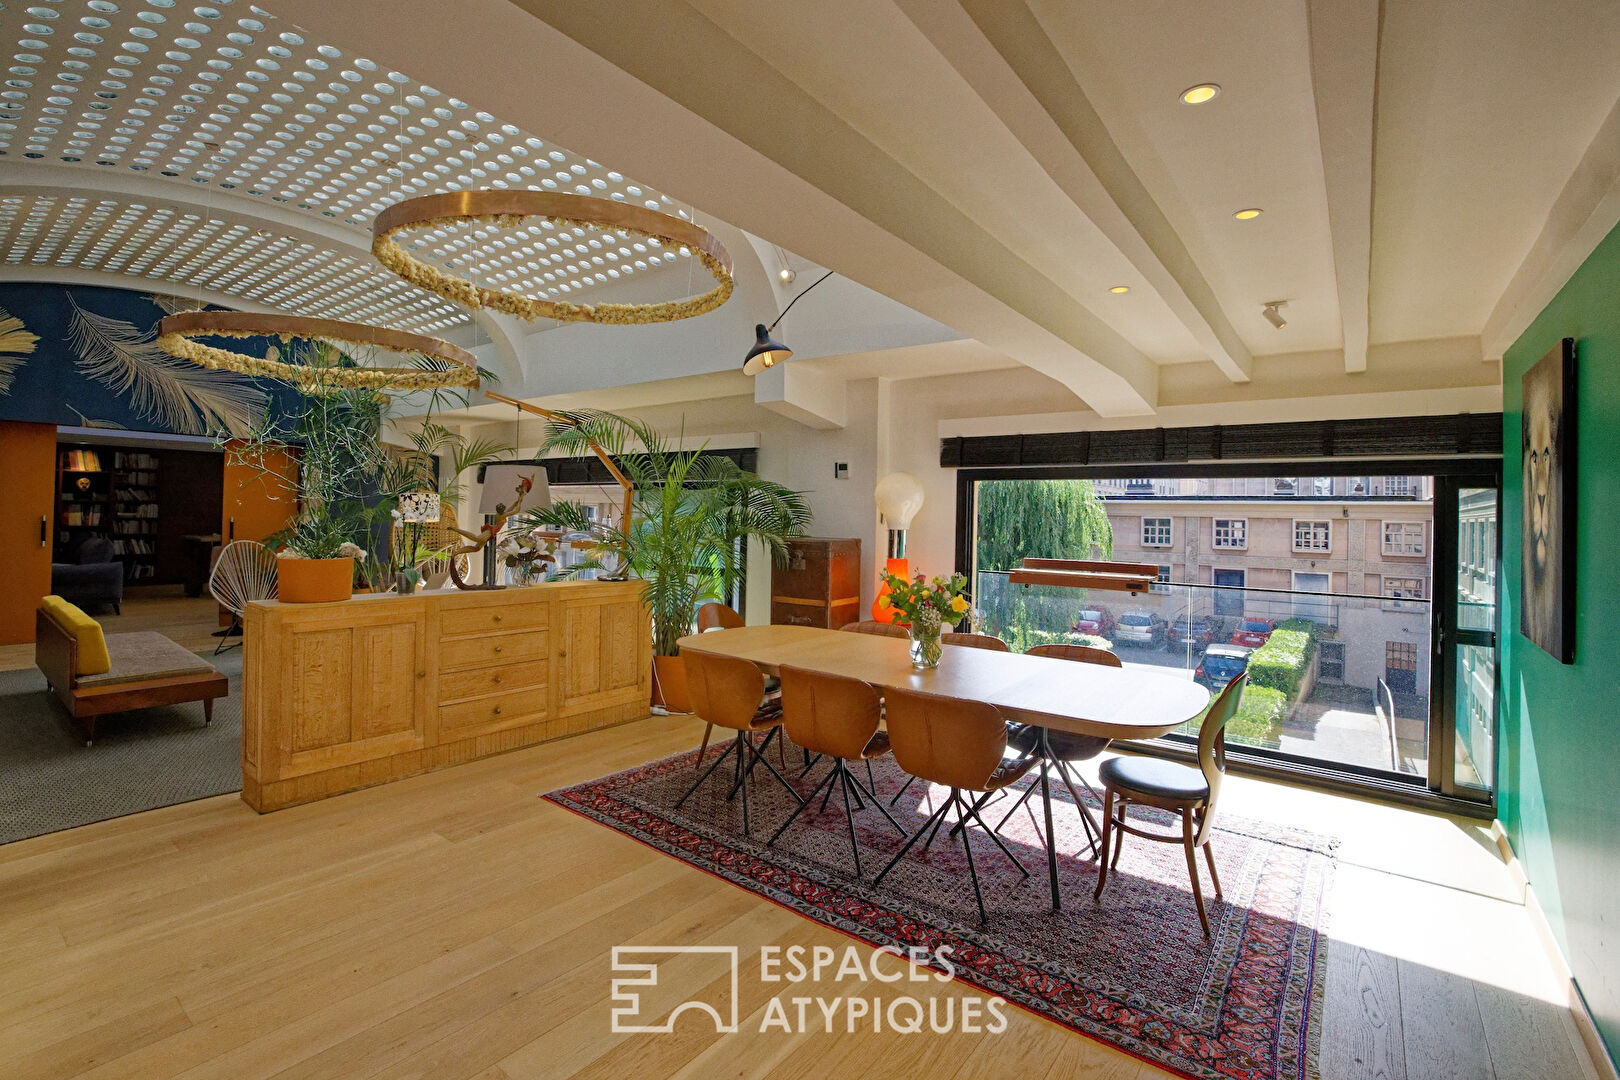 Exceptional loft in the very center, in the heart of the UNESCO-listed Perret sector